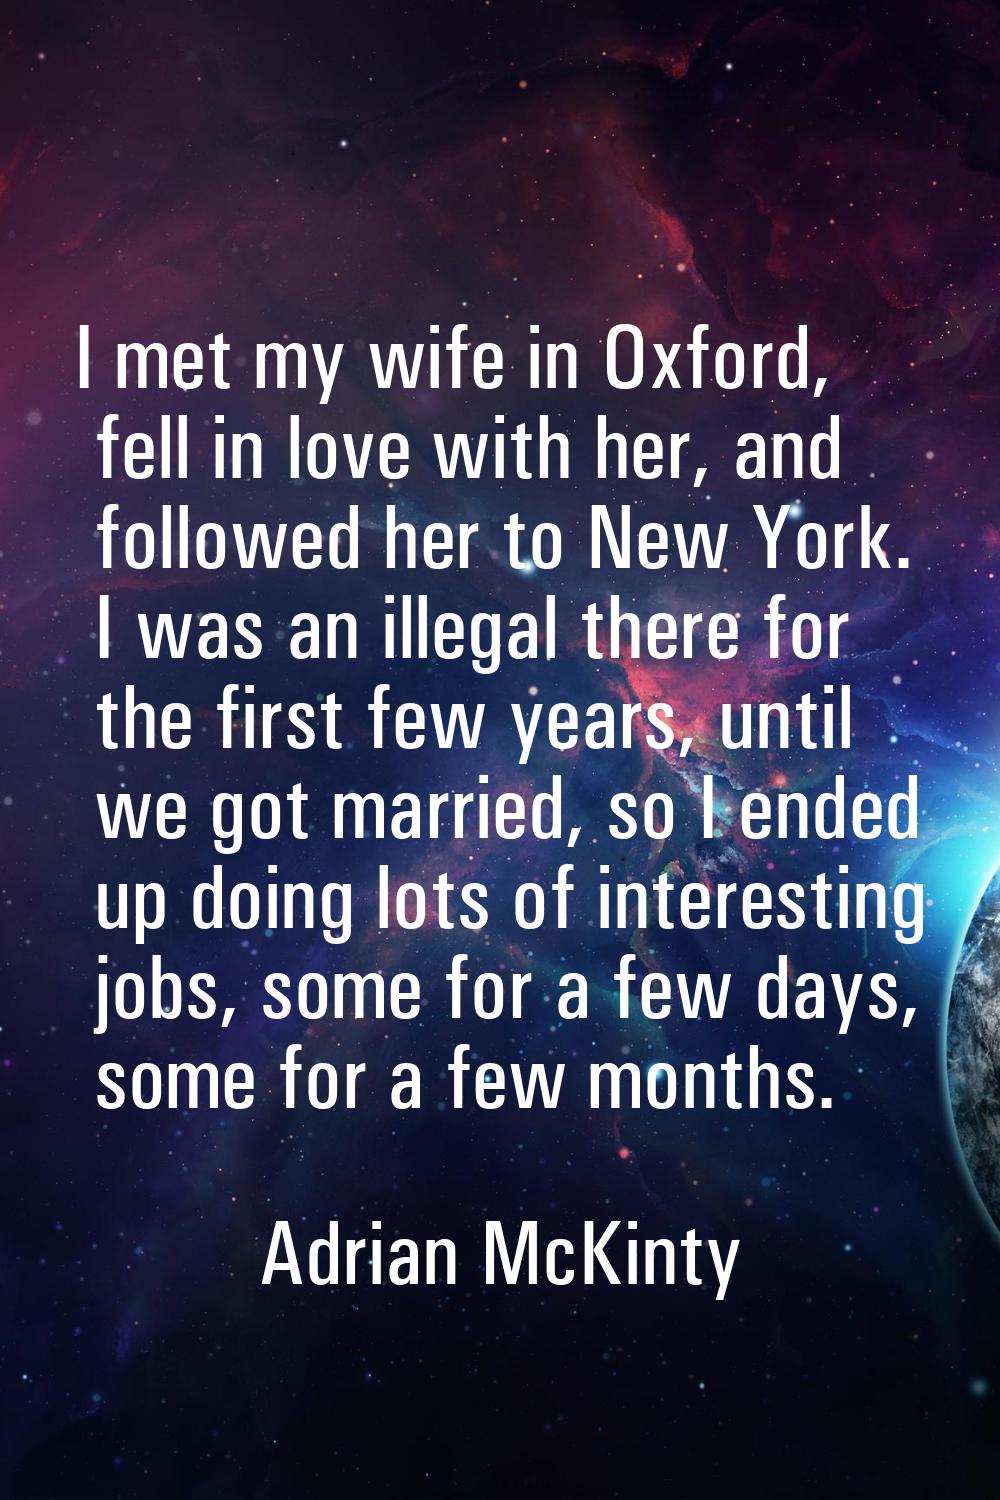 I met my wife in Oxford, fell in love with her, and followed her to New York. I was an illegal ther